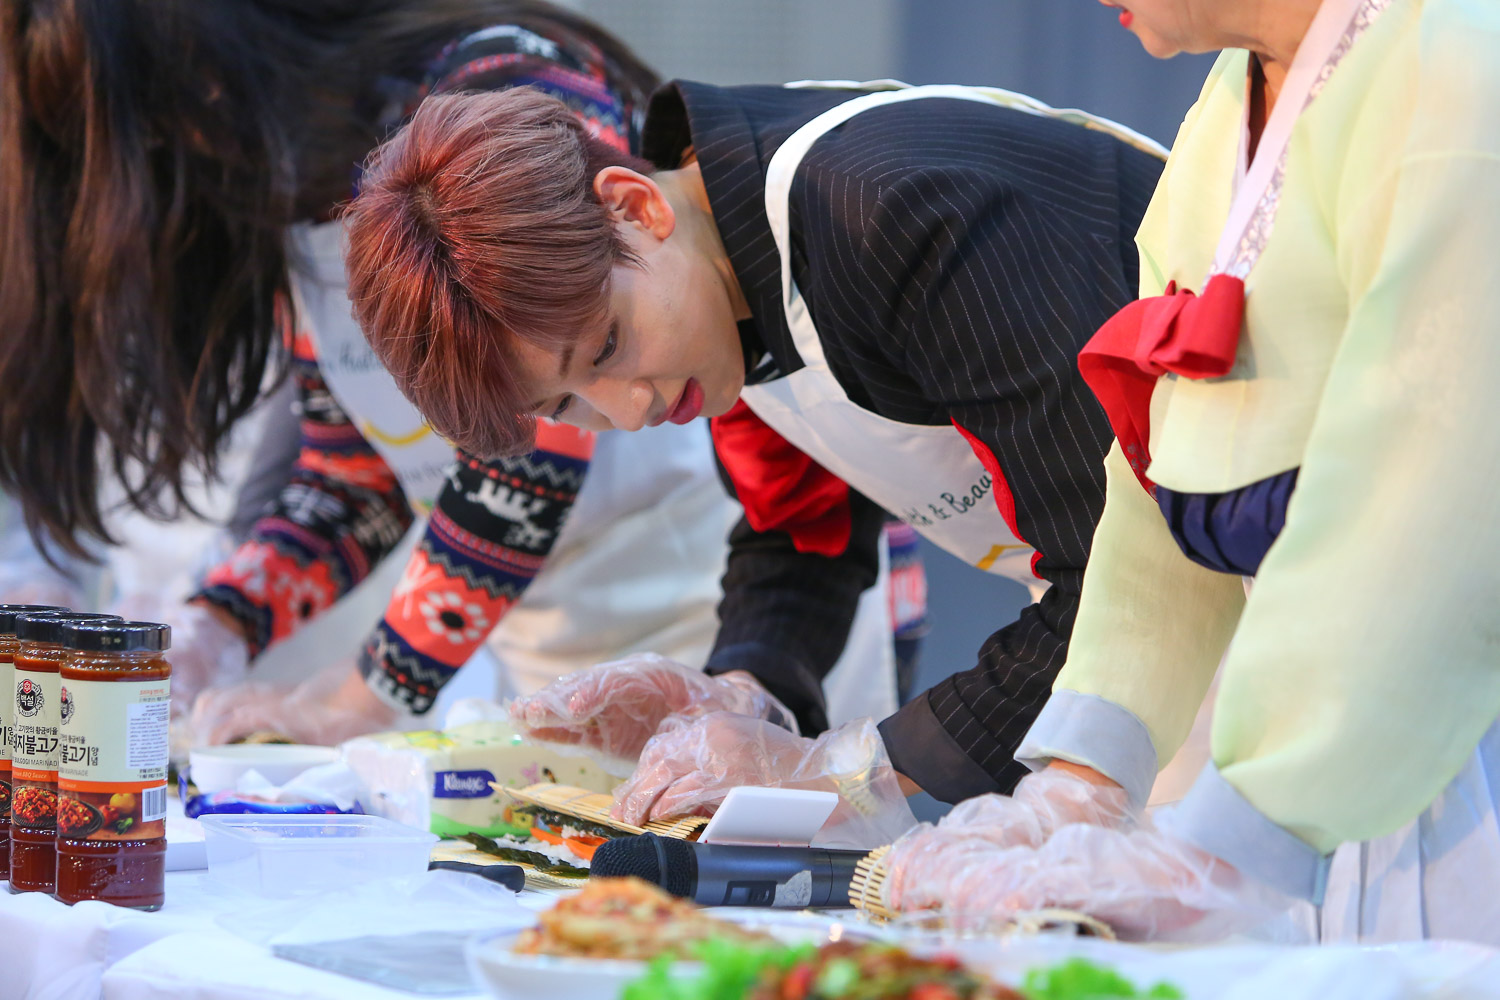 K-Food Day with BamBam